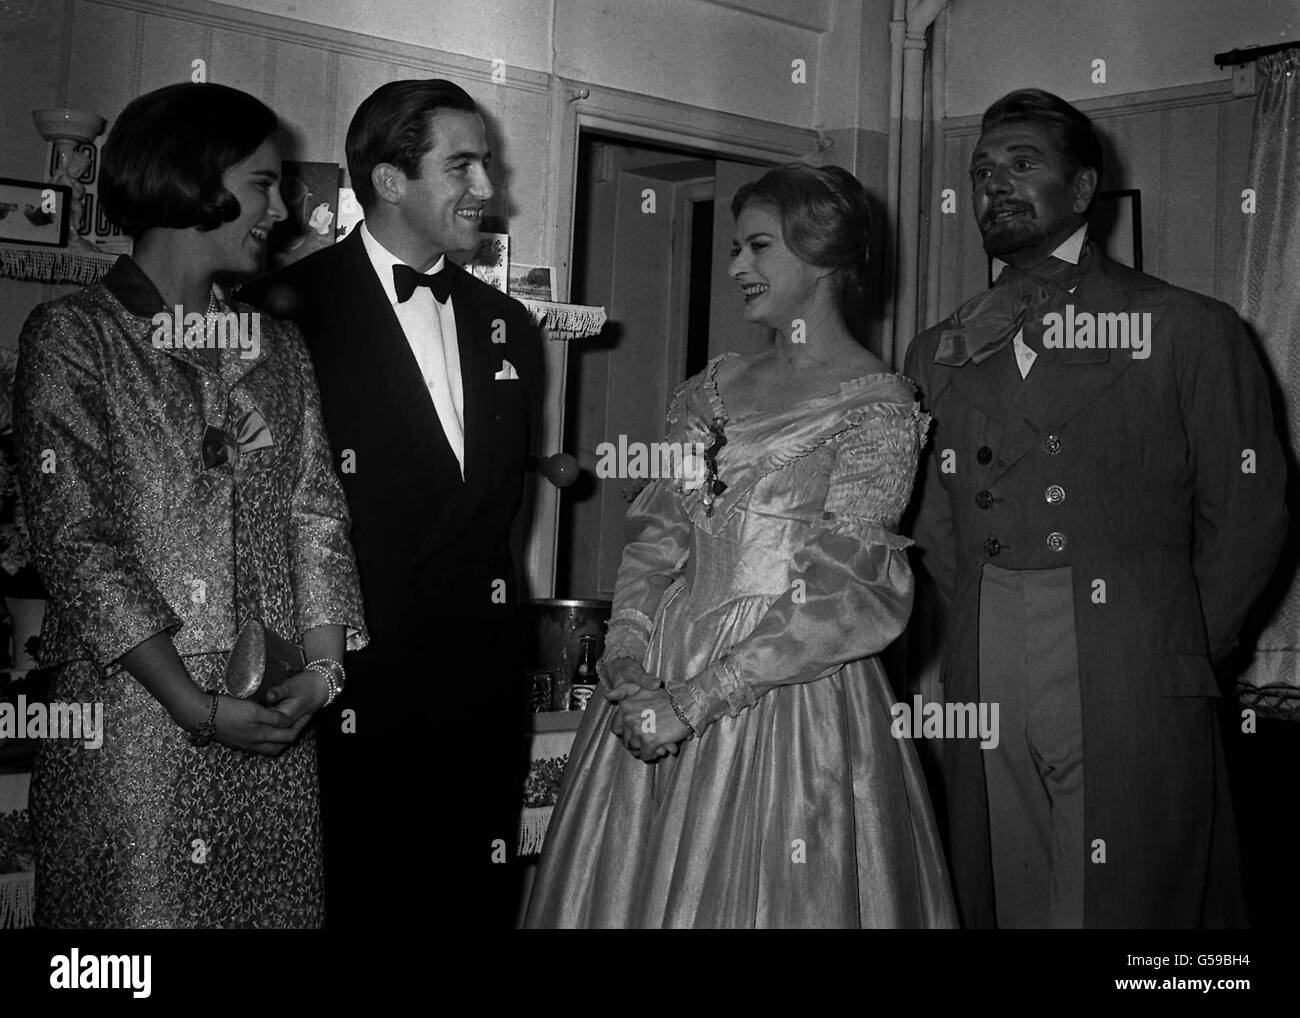 1965: King Constantine of Greece and Queen Anne-Marie (left) talk with the stars of the show, Ingrid Bergman and Sir Michael Redgrave, in Miss Bergman's dressing room after seeing the play 'A month in the Country' at the Cambridge Theatre, London. Stock Photo